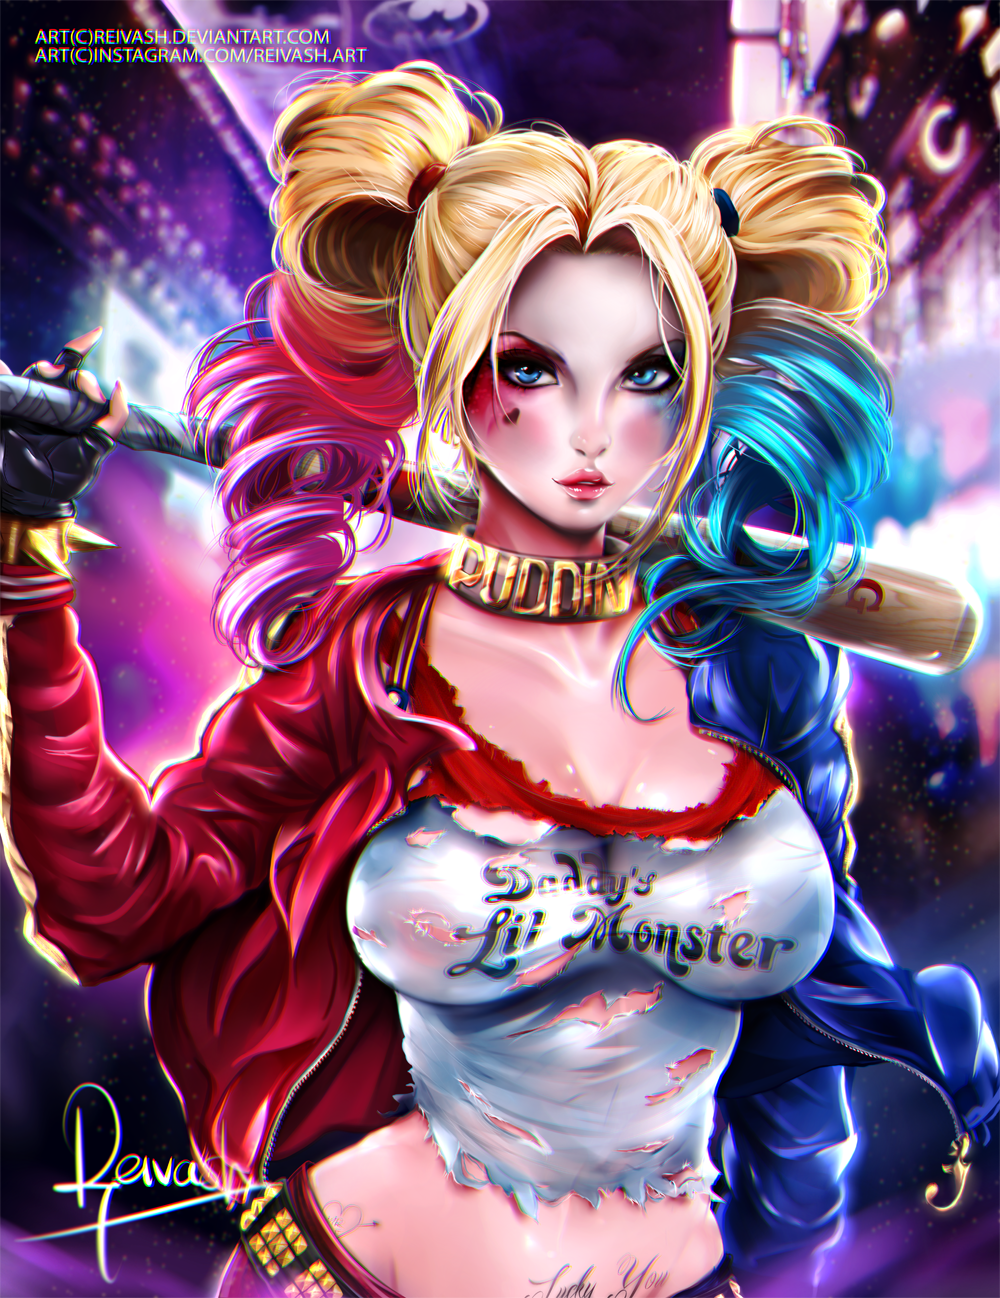 Harley Quinn, Girls From Overwatch and Adventure Time in Erotic Art by Reivash